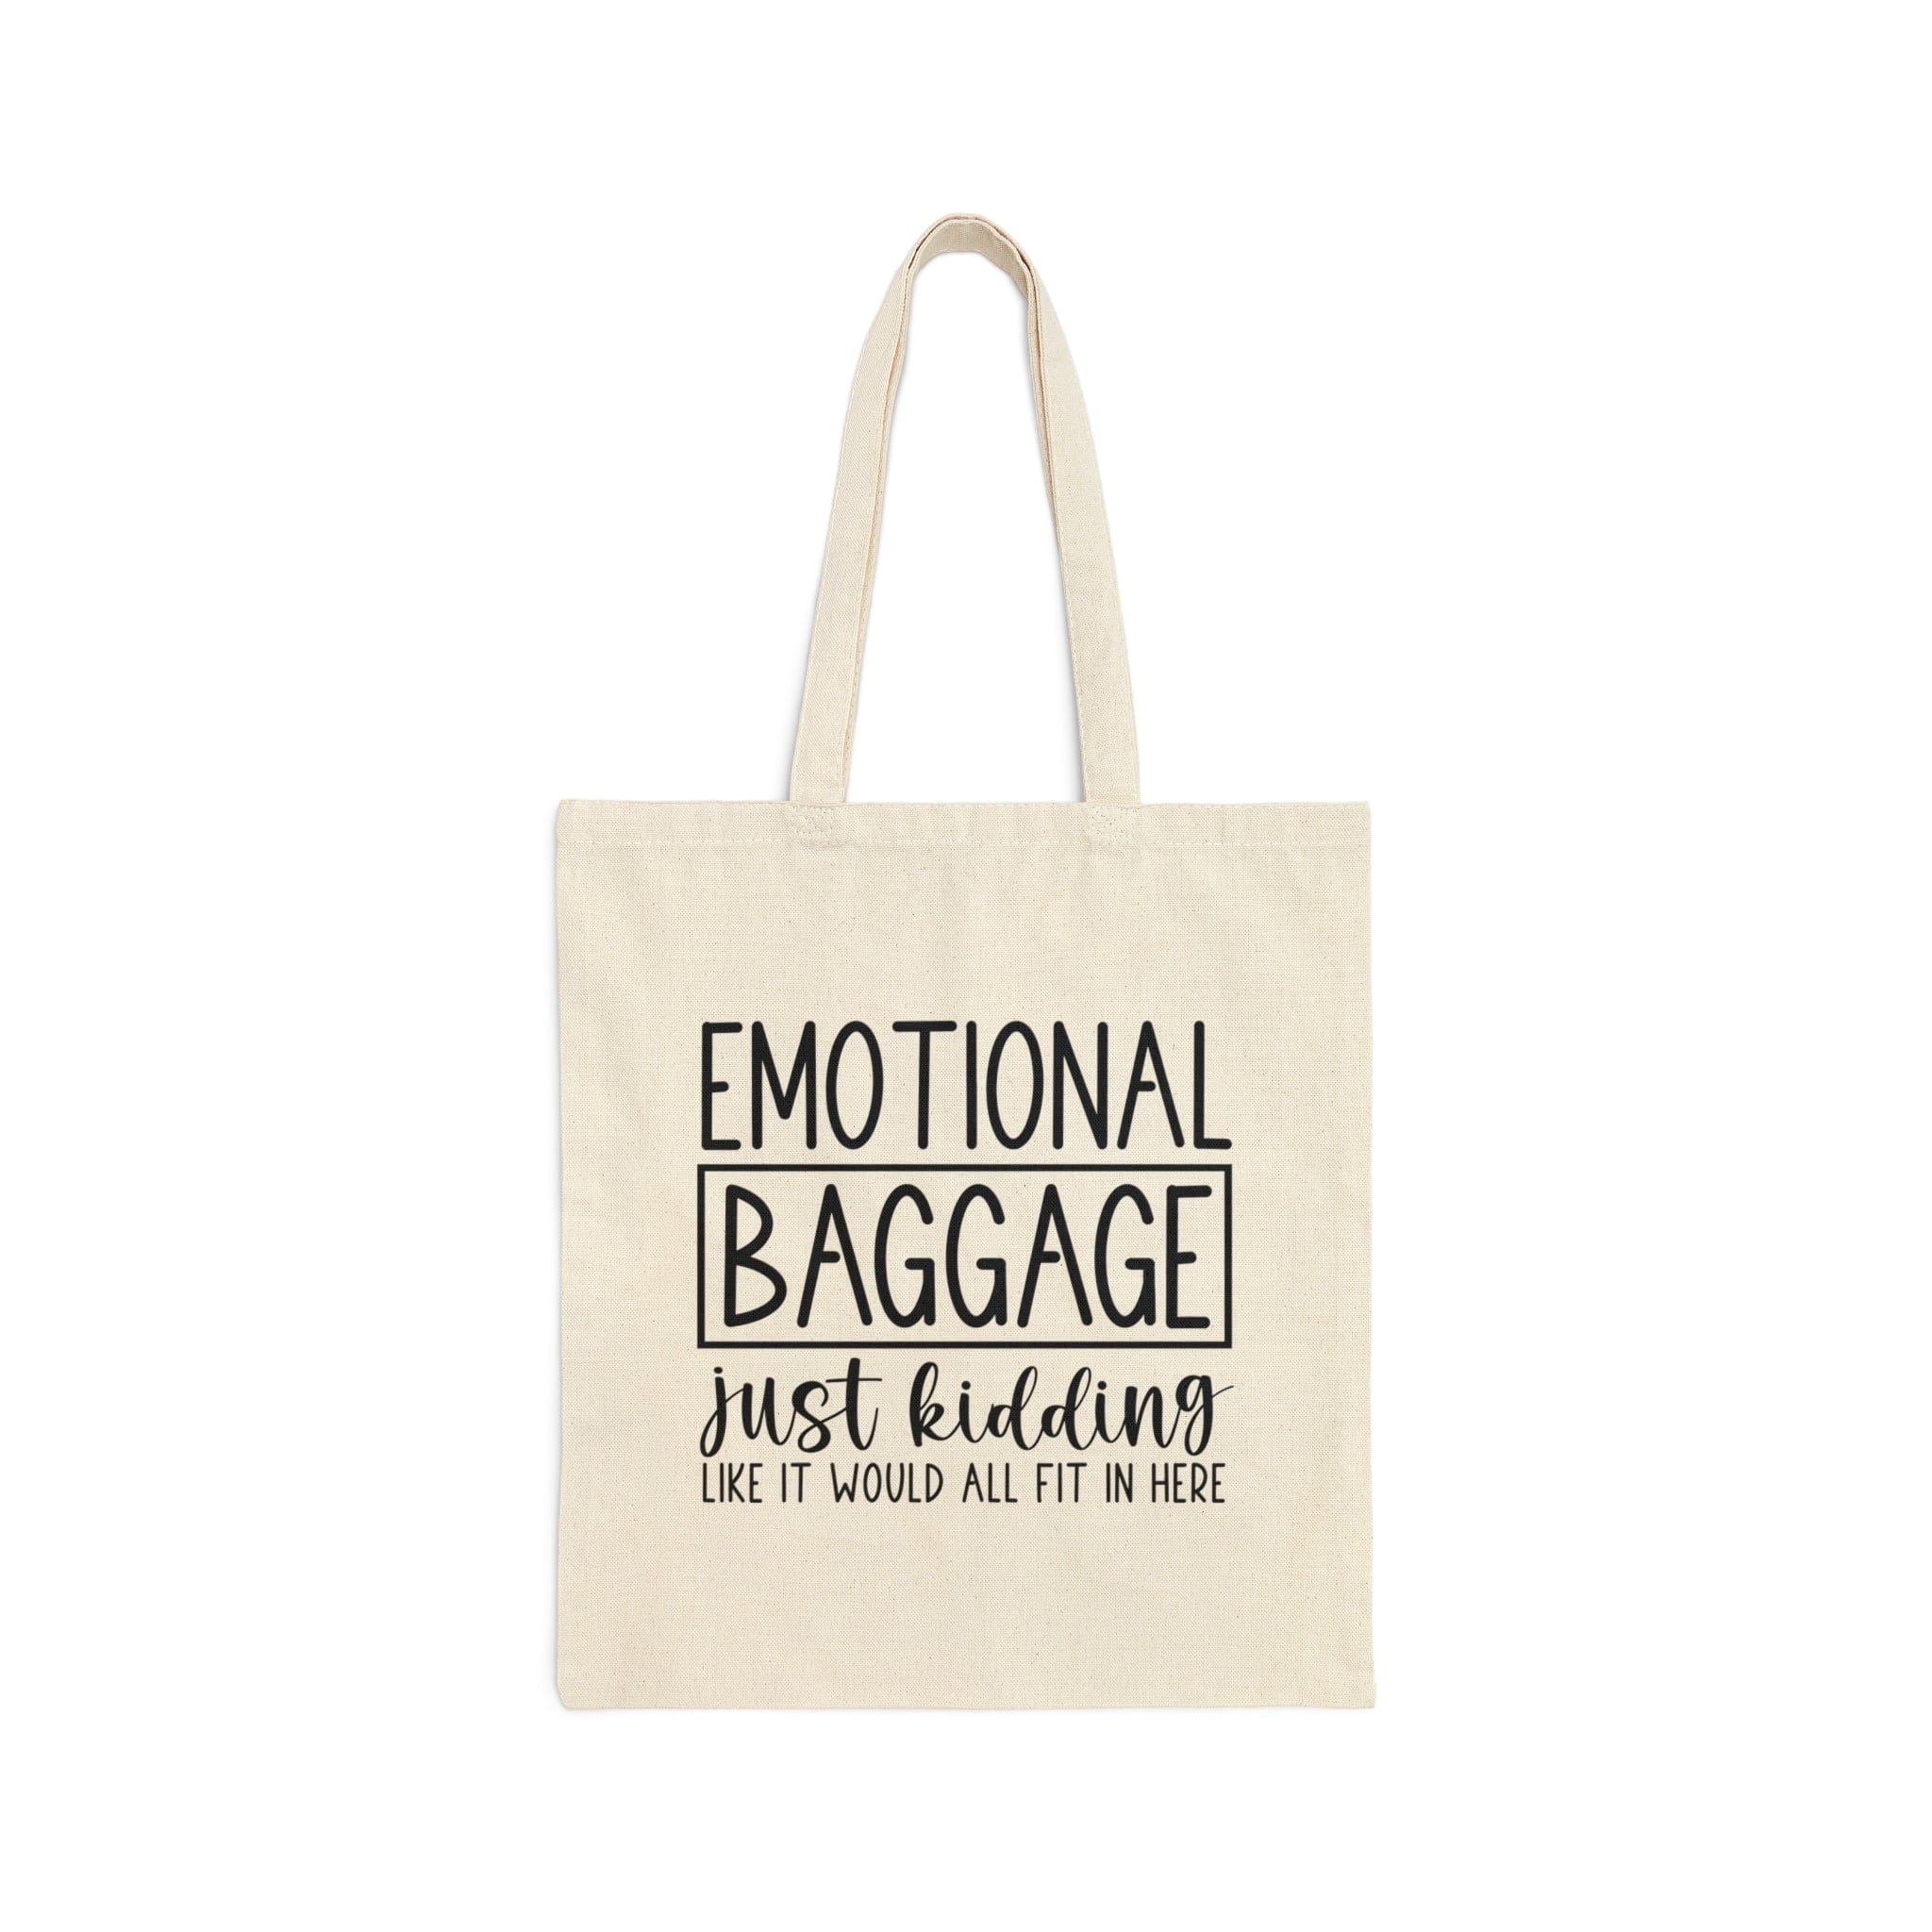 "Emotional Baggage, Just Kidding Like It Would All Fit In Here" Tote Bag